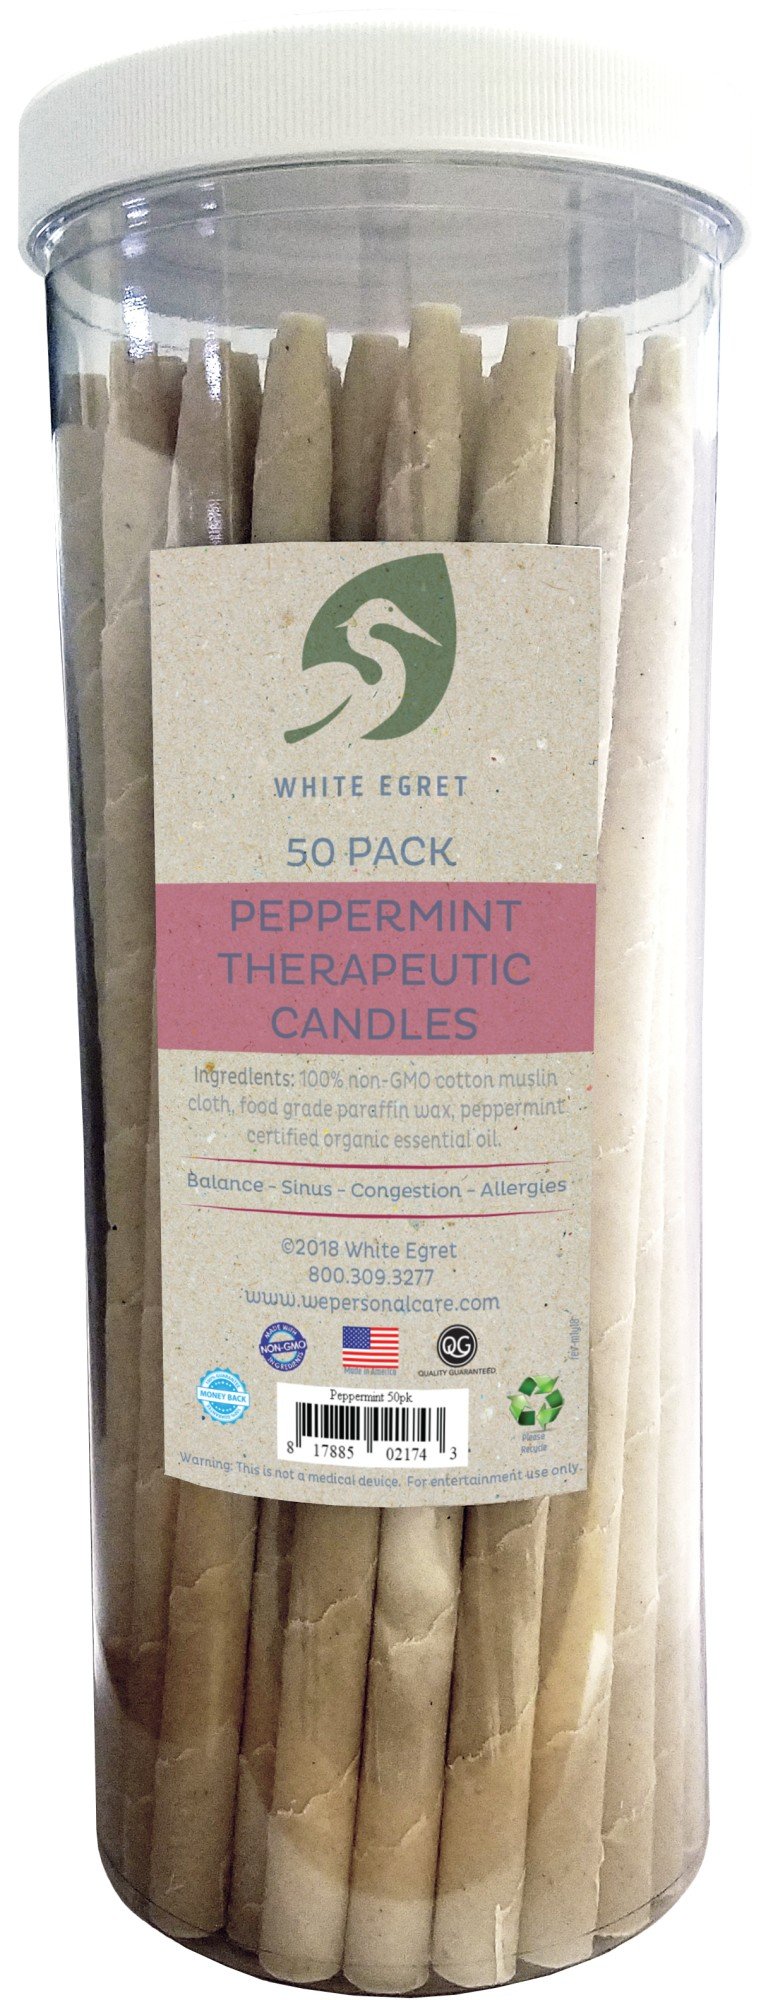 White Egret INC Peppermint Candle Container w/50 1/2 inch 50 Pack